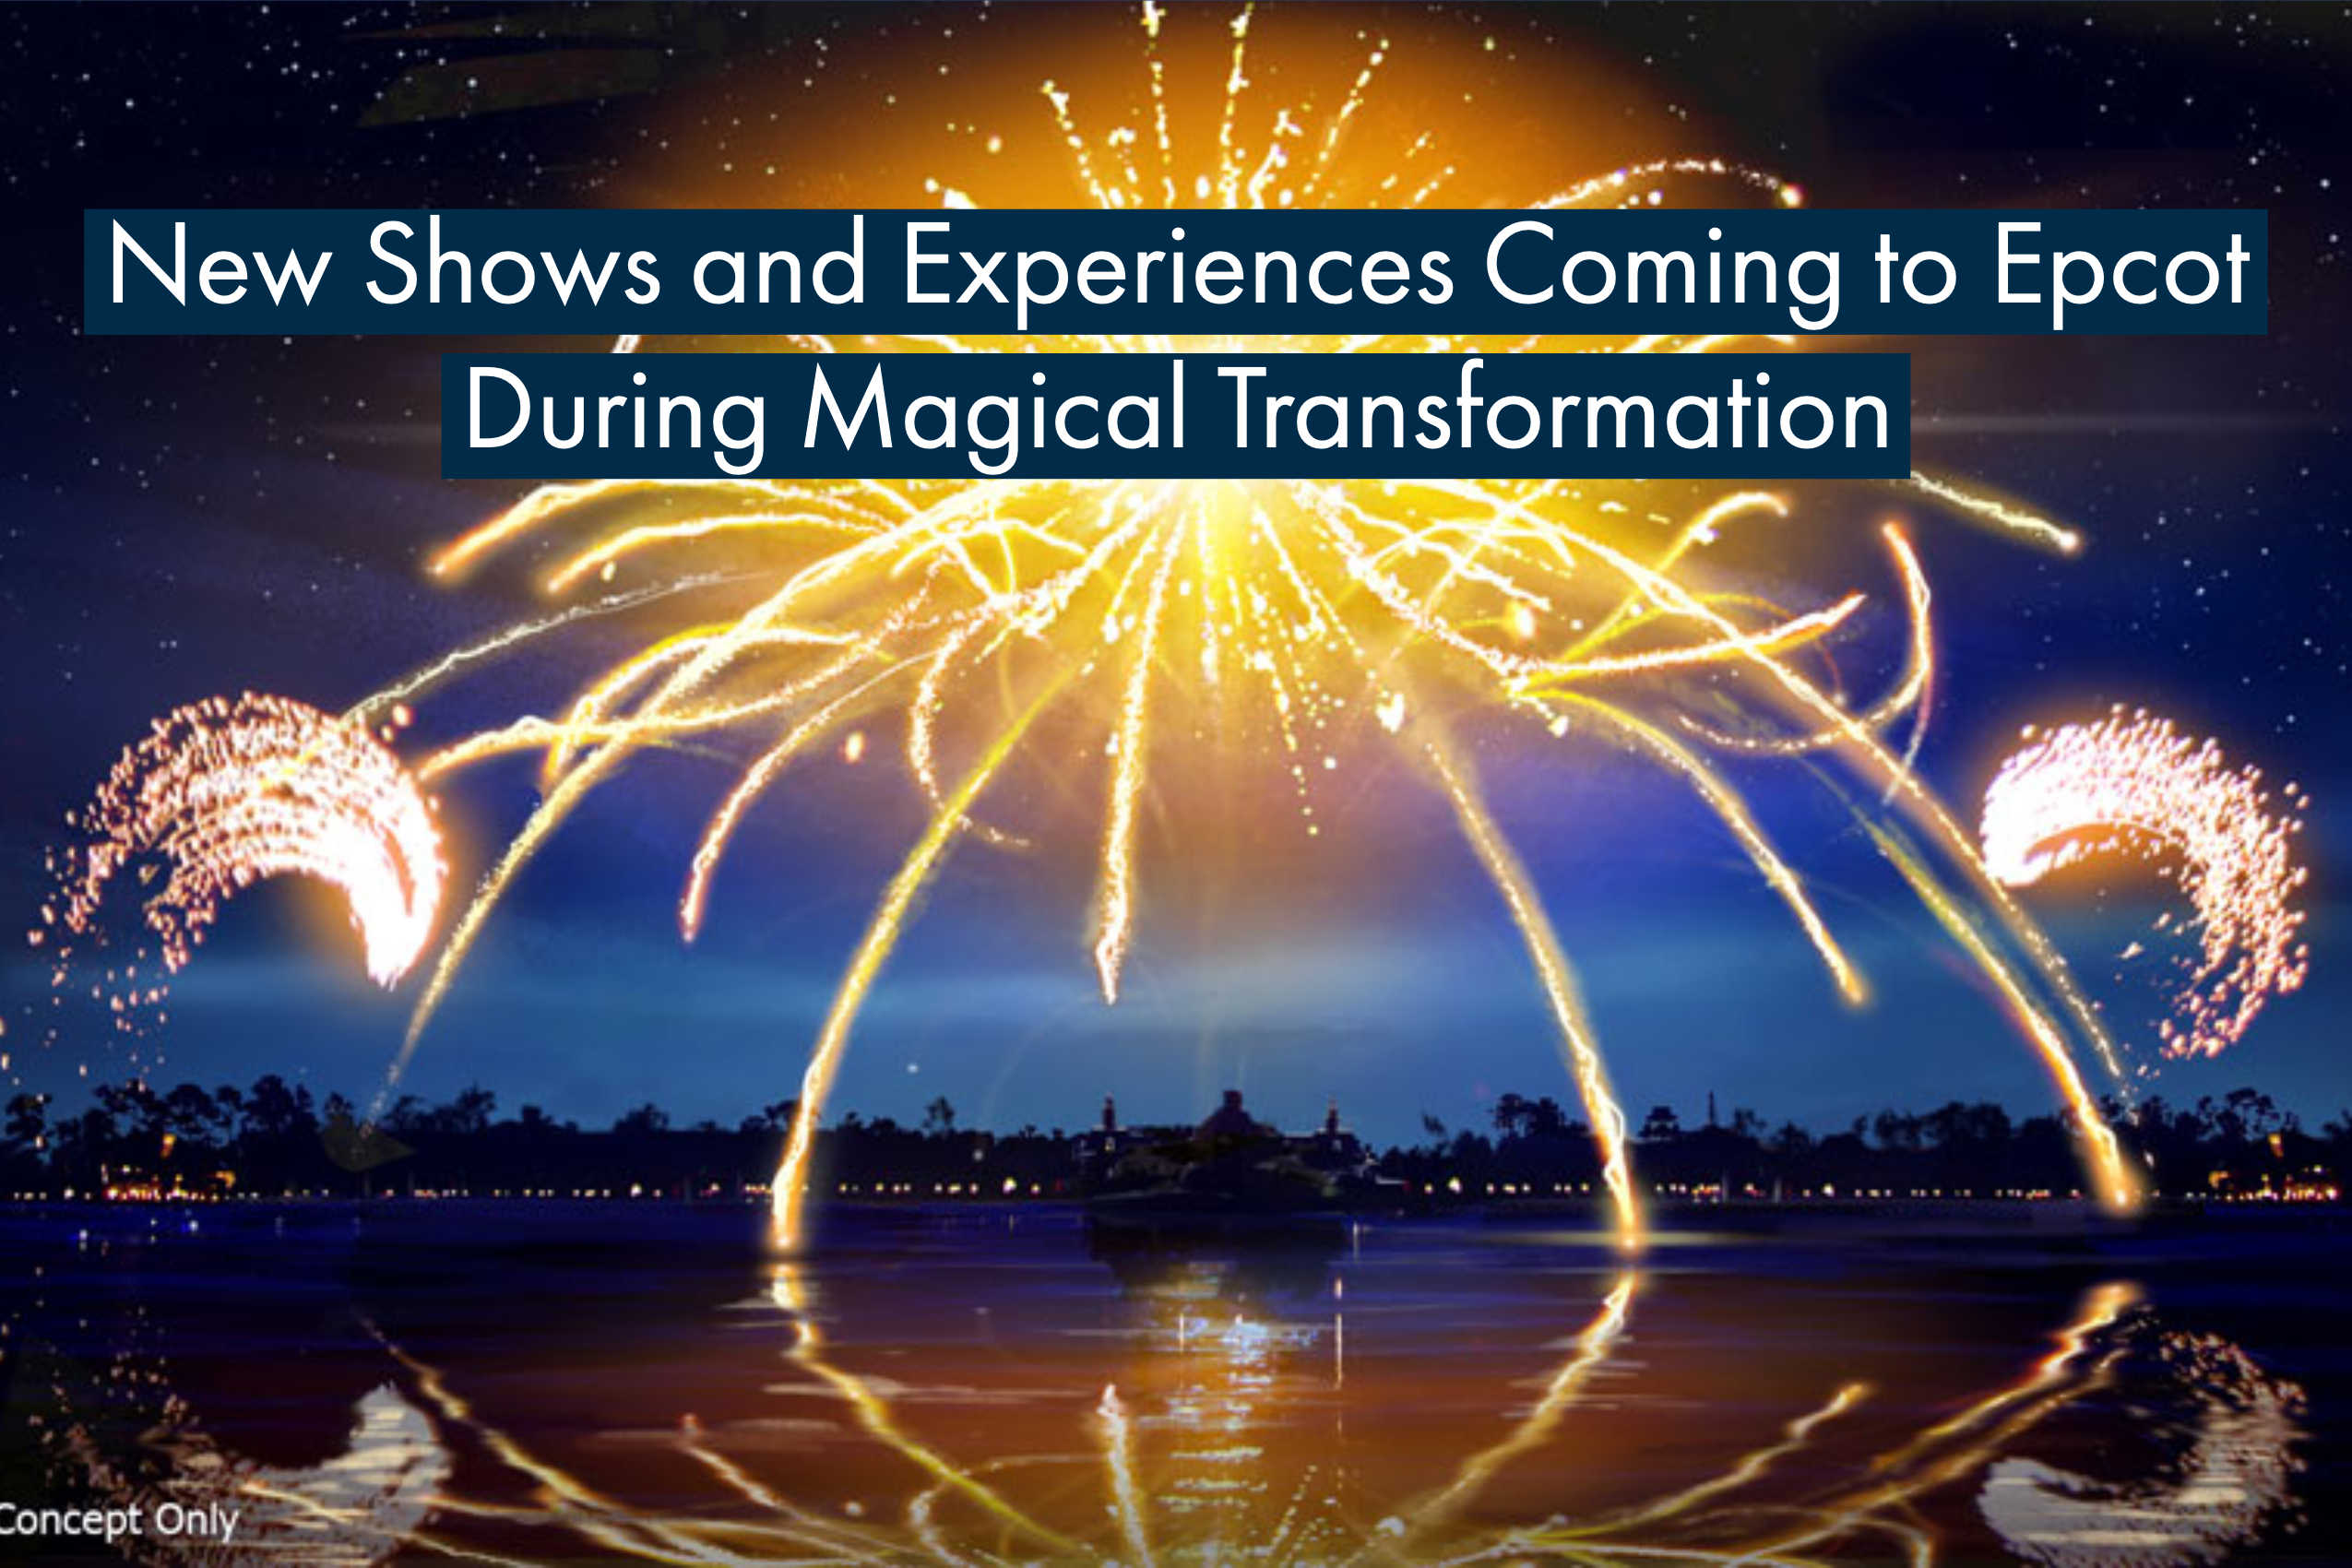 New Shows and Experiences Coming to Epcot During Magical Transformation